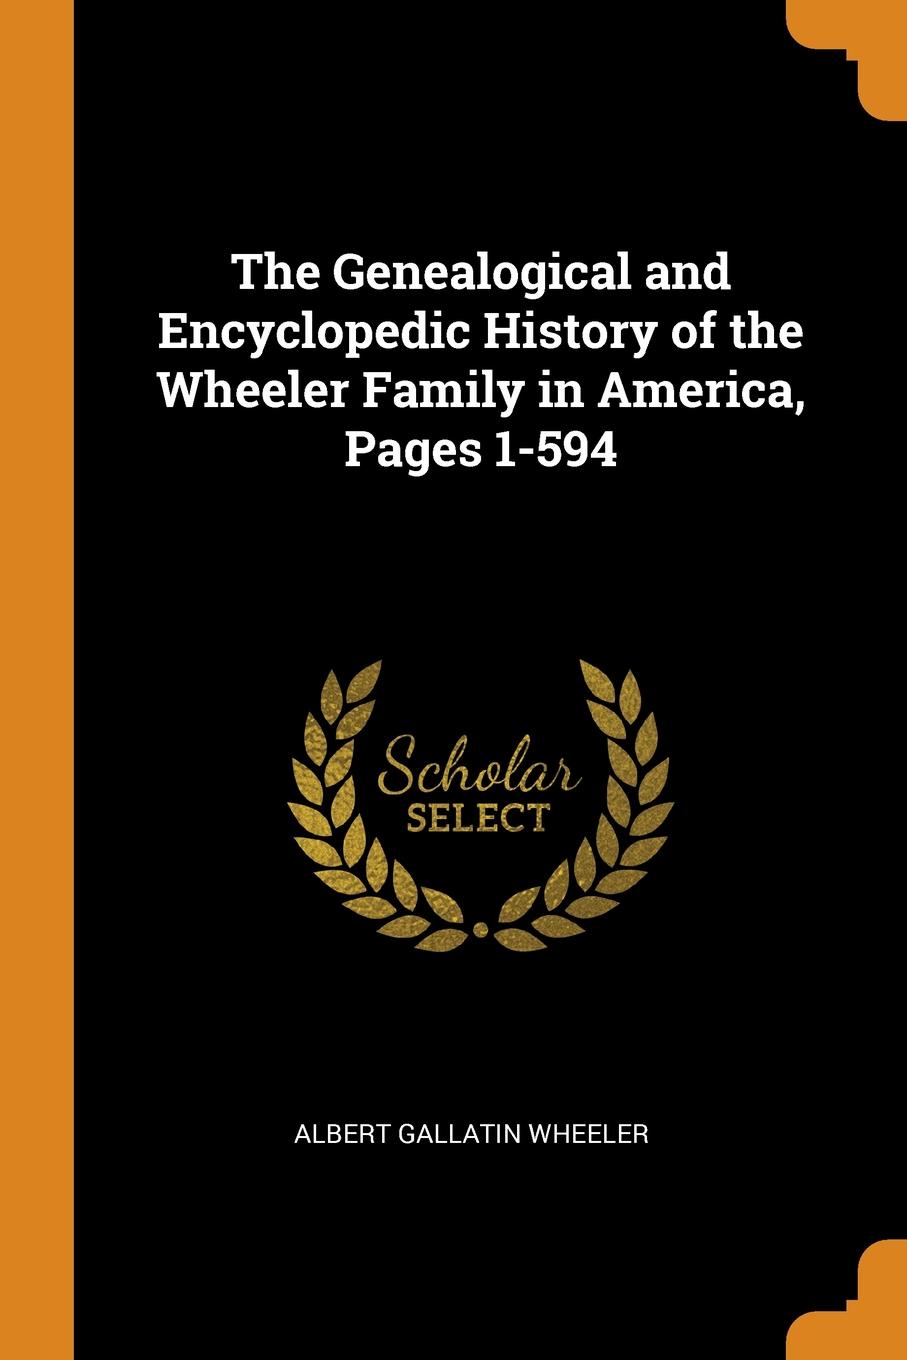 фото The Genealogical and Encyclopedic History of the Wheeler Family in America, Pages 1-594